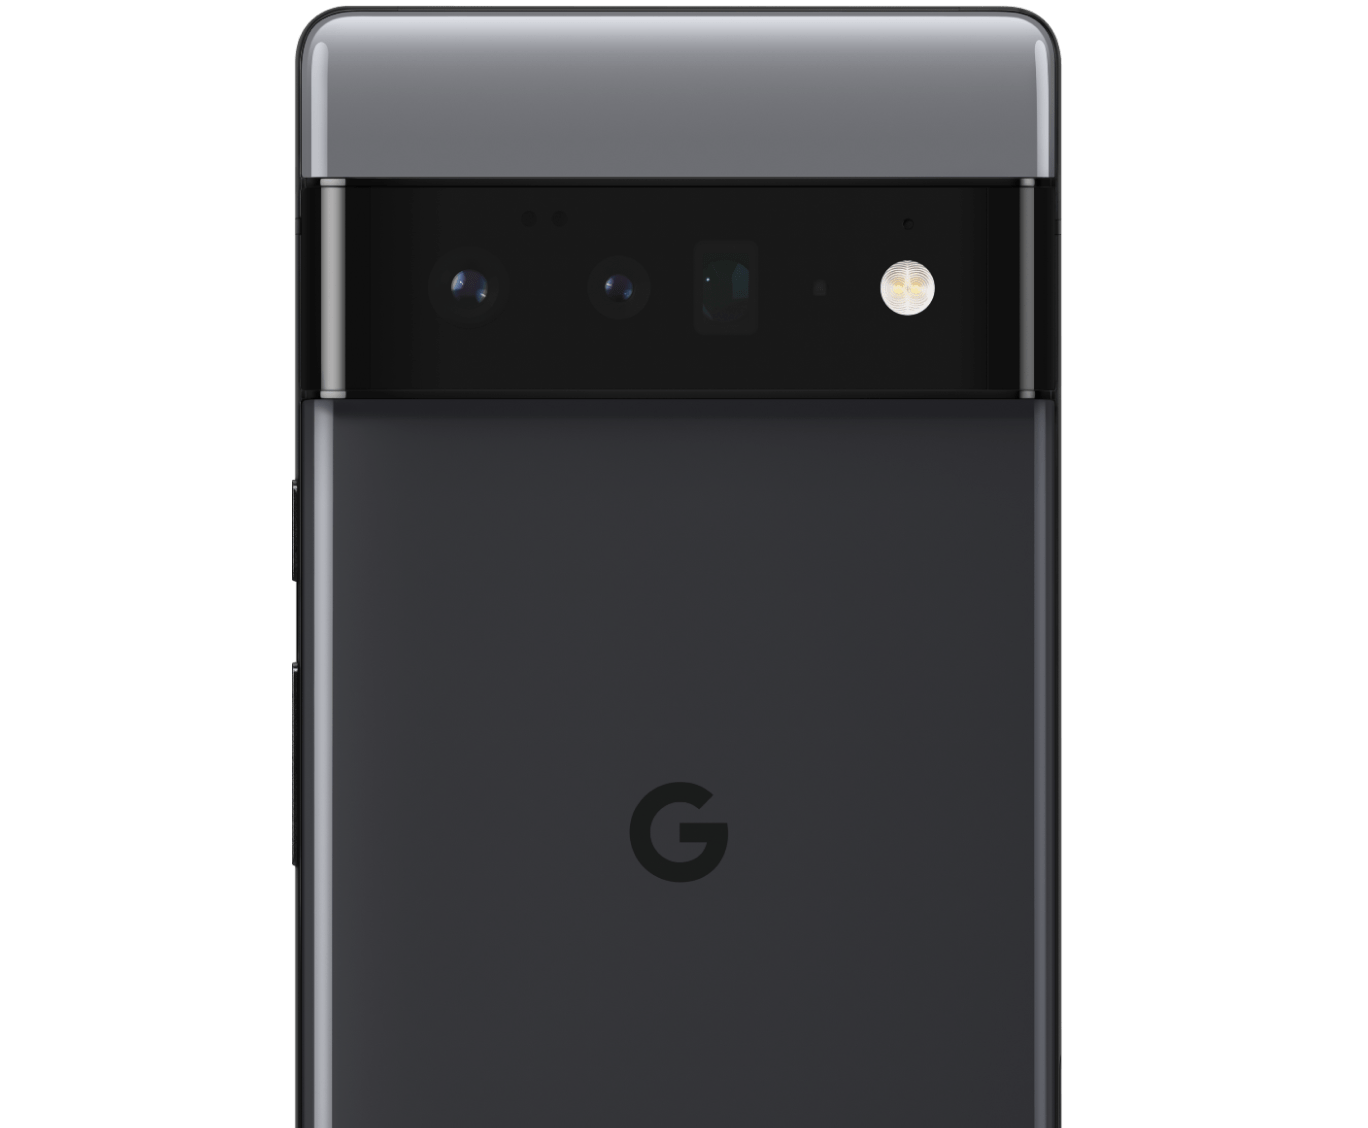 Google to spend more marketing Pixel 6 series than ever - 9to5Google